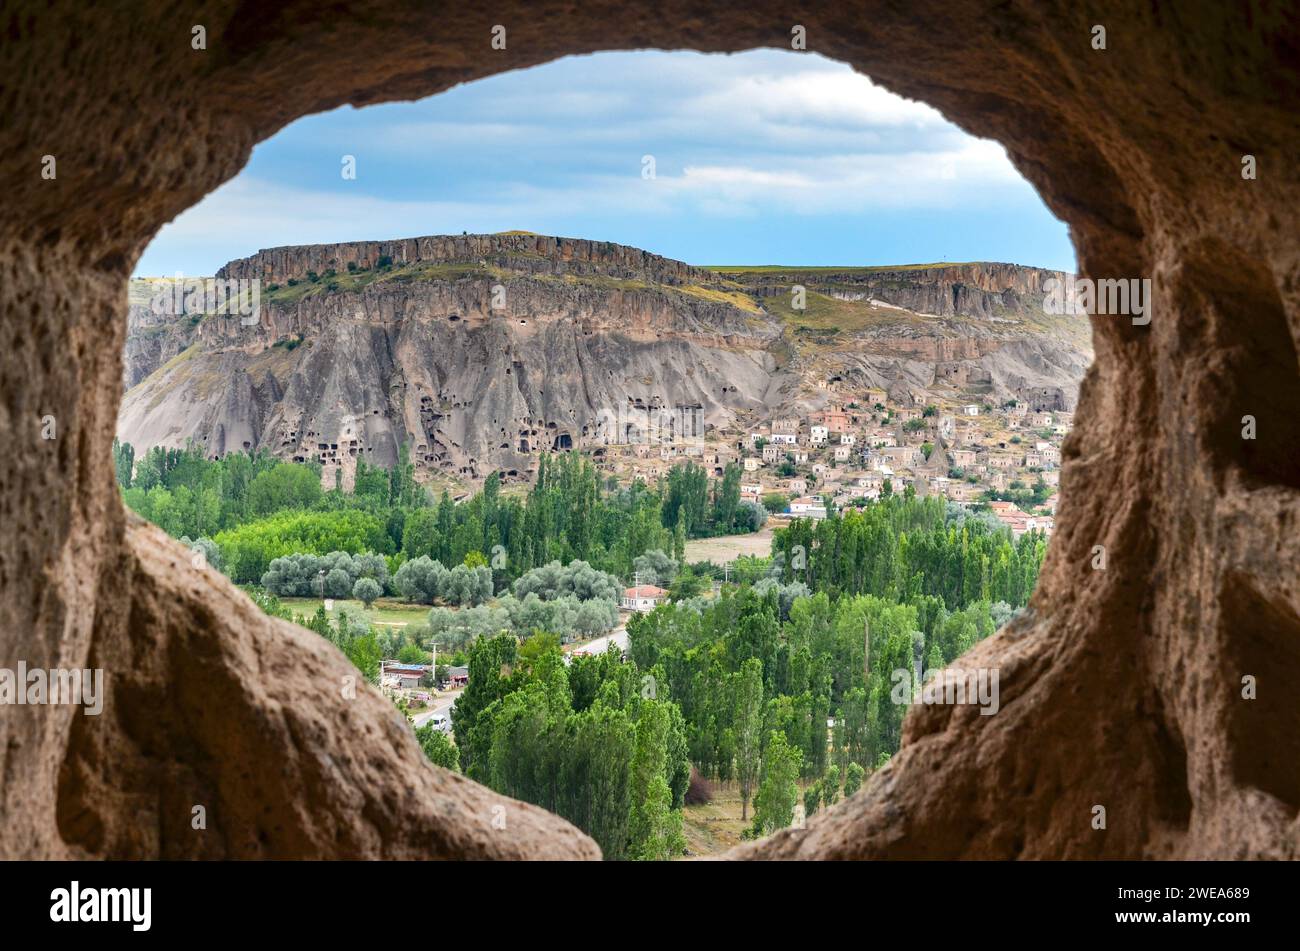 View of a lush valley and rock formations from a cave opening looking like a round window, showcasing nature and geology, in Cappadocia, Turkey Stock Photo